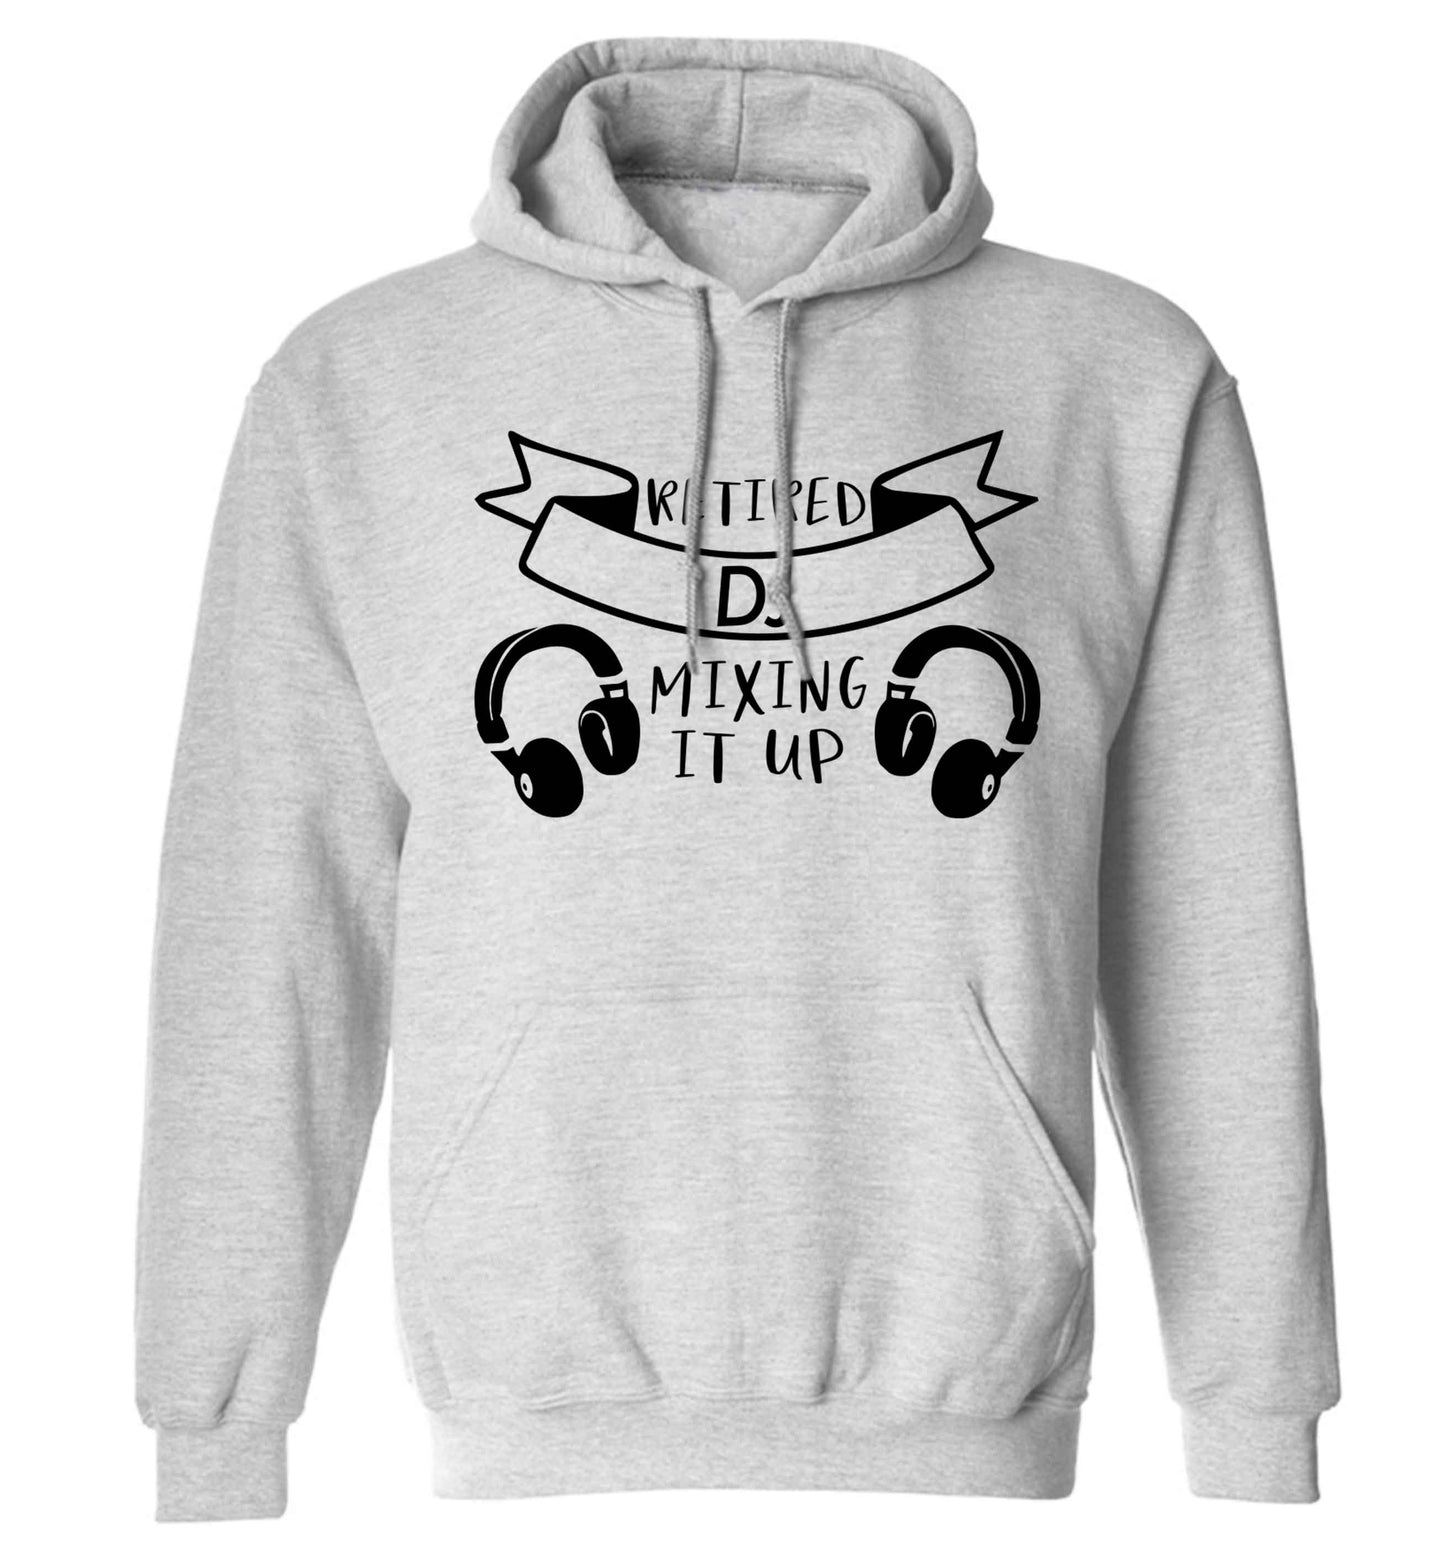 Retired DJ mixing it up adults unisex grey hoodie 2XL